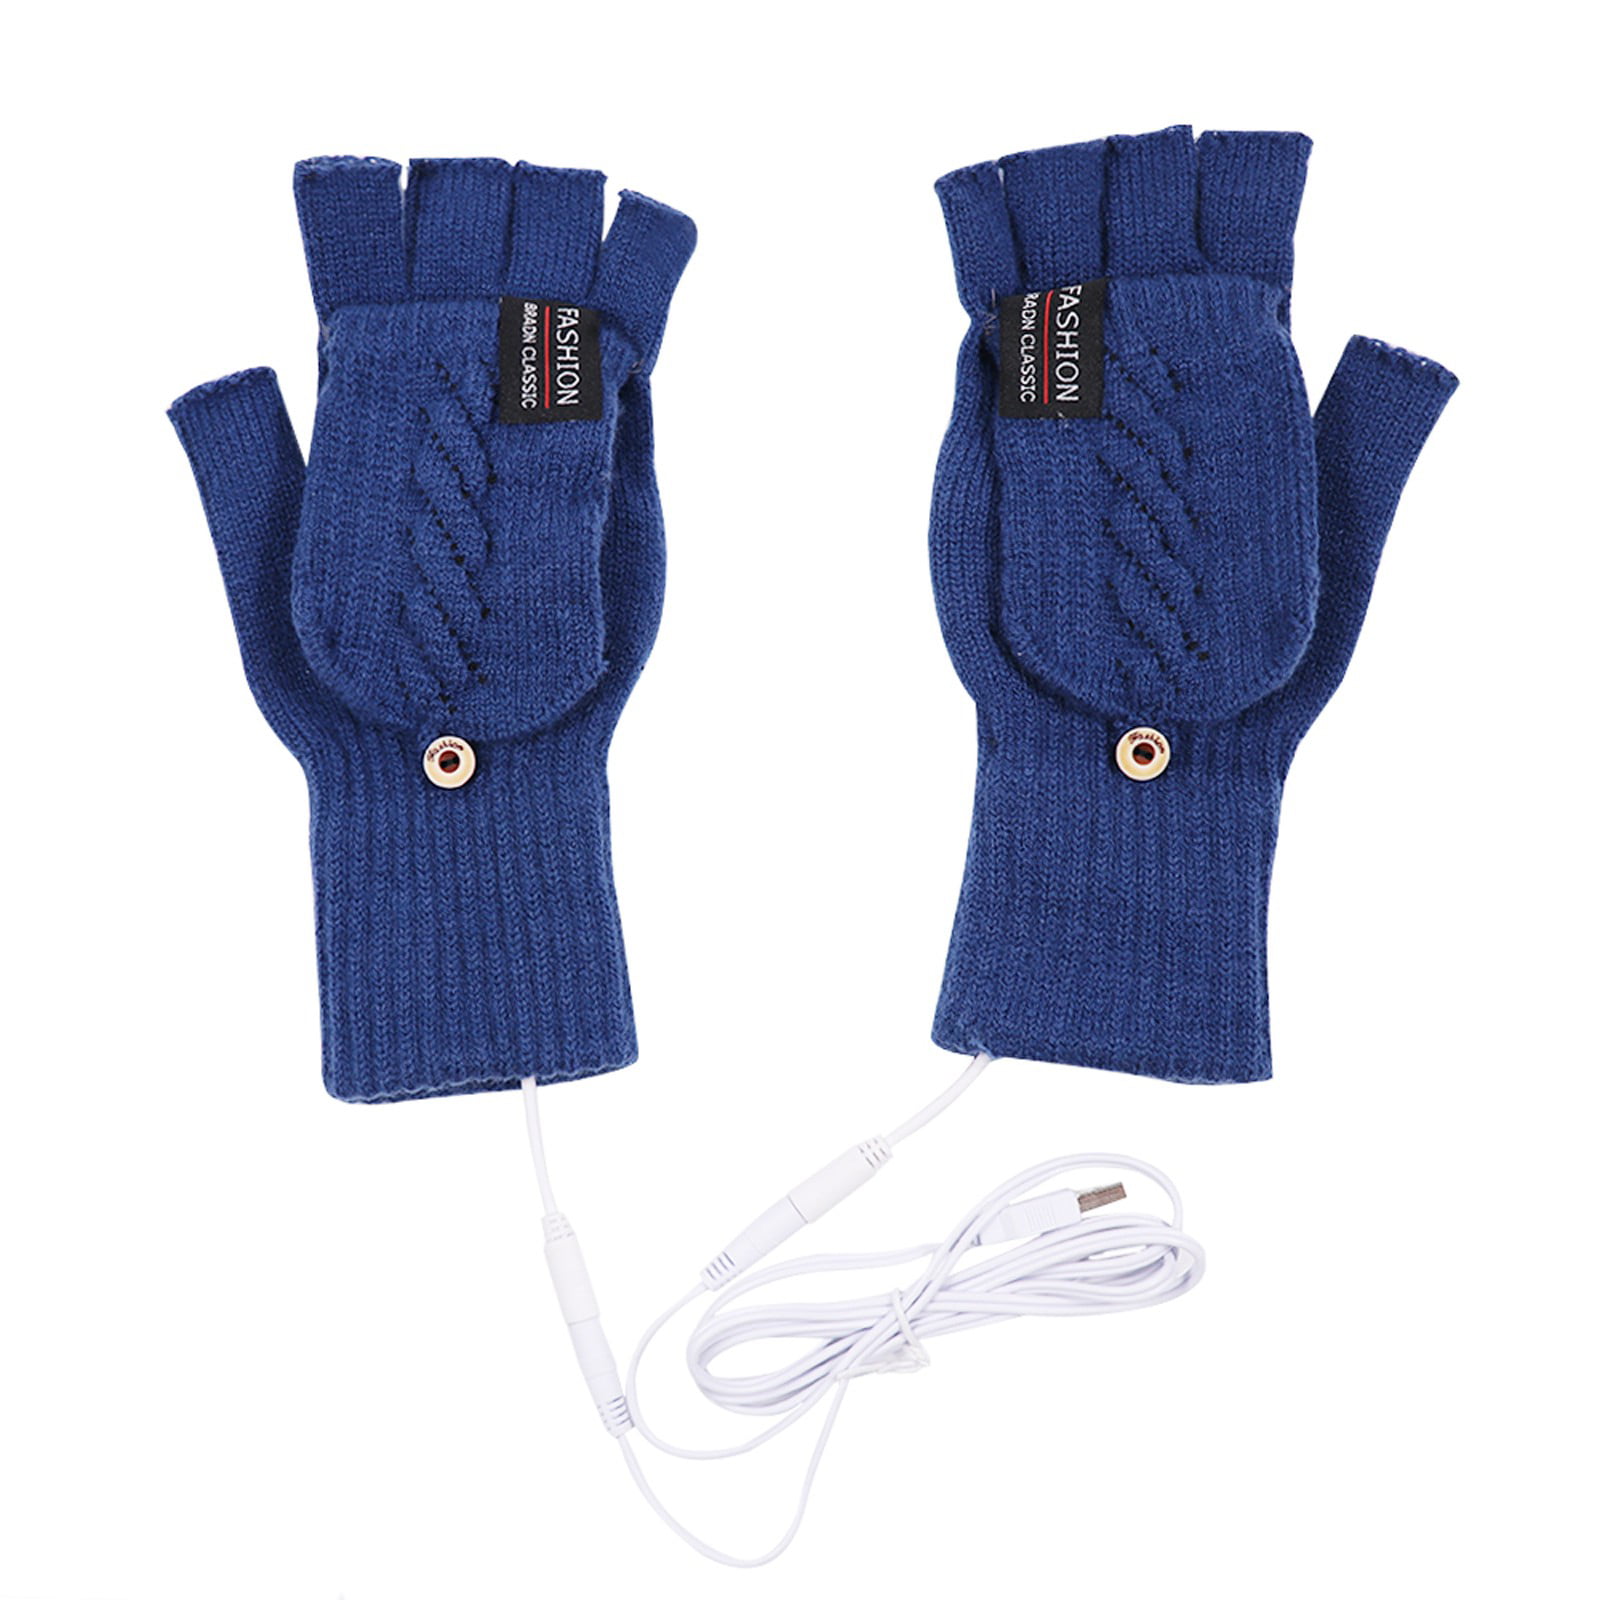 Sales Green knit gloves with a strap and button fingerless gloves half finger gloves wrist warmers knit womens gloves